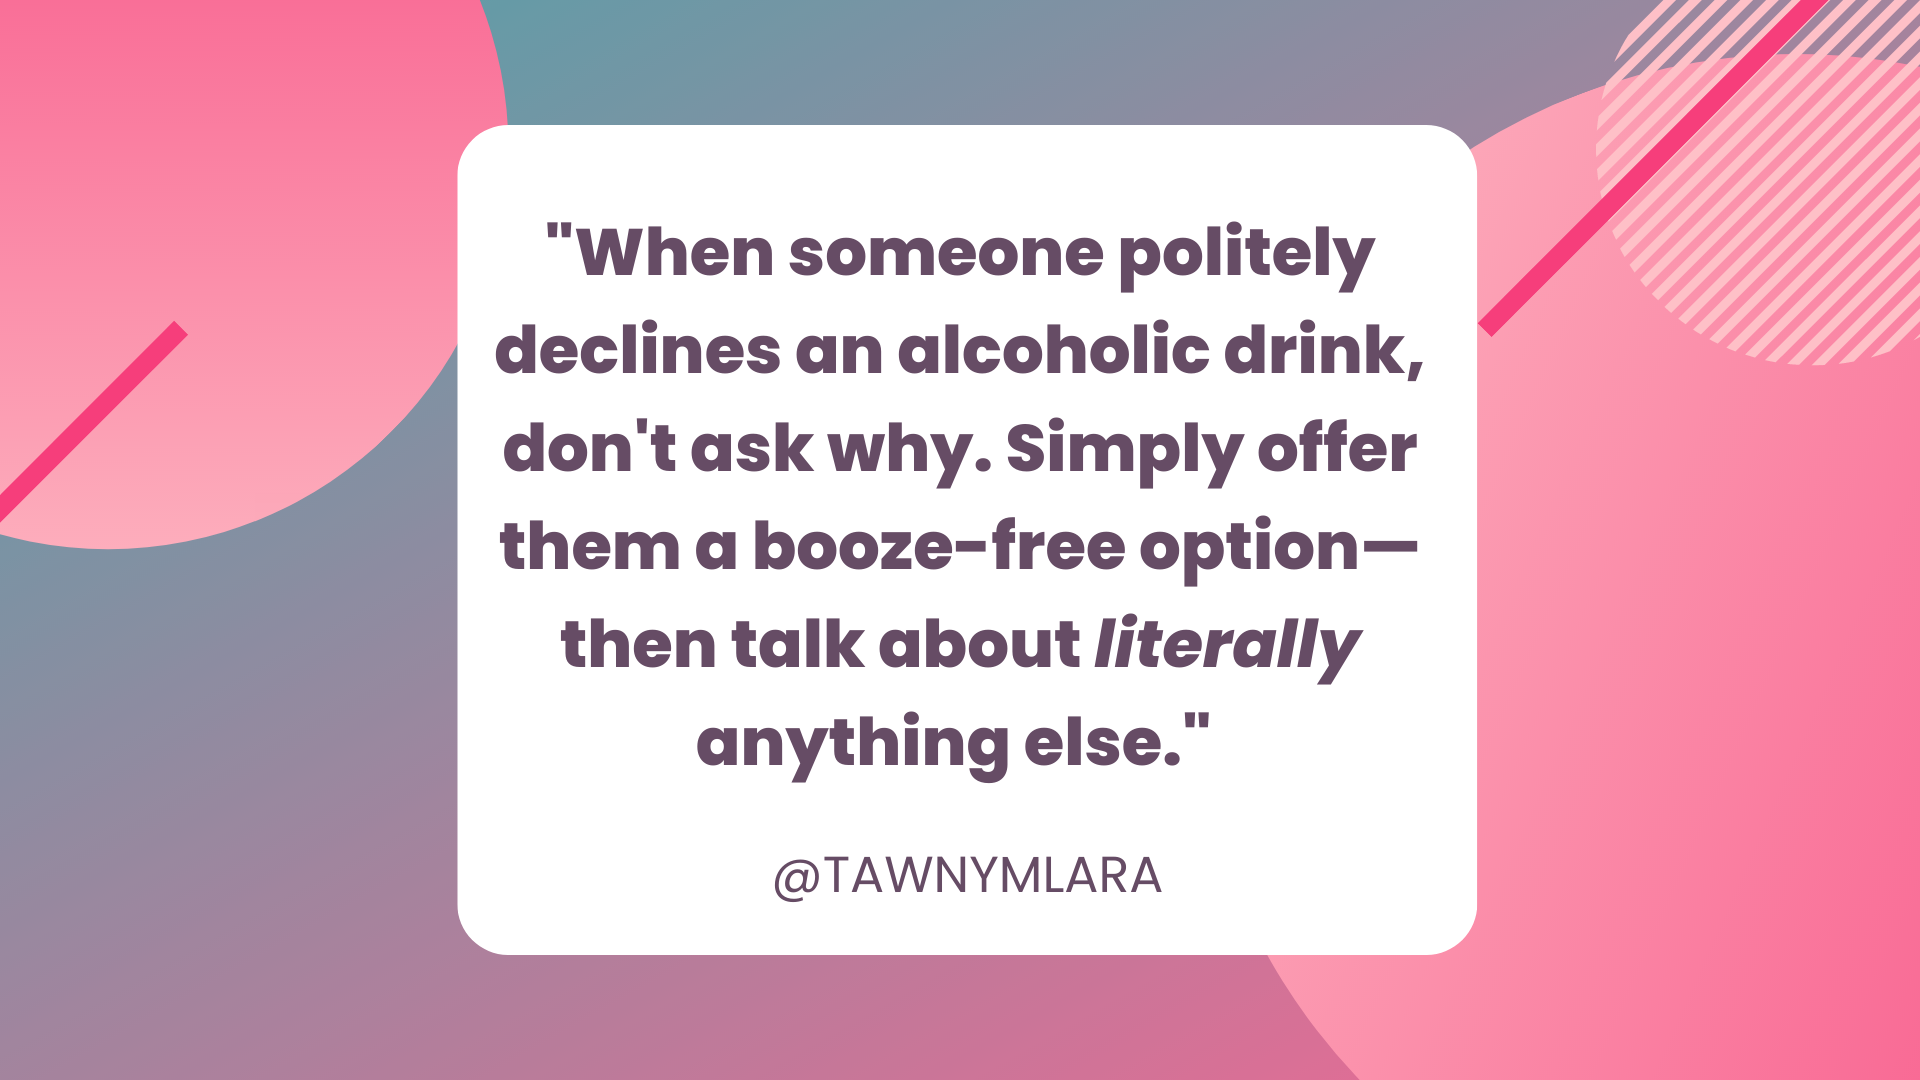 A pink and gray geometric background. In the foreground is a white box with black text that says "When someone politely declines an alcoholic drink, don't ask why. Simply offer them a booze-free option—then talk about literally anything else." @TAWNYMLARA